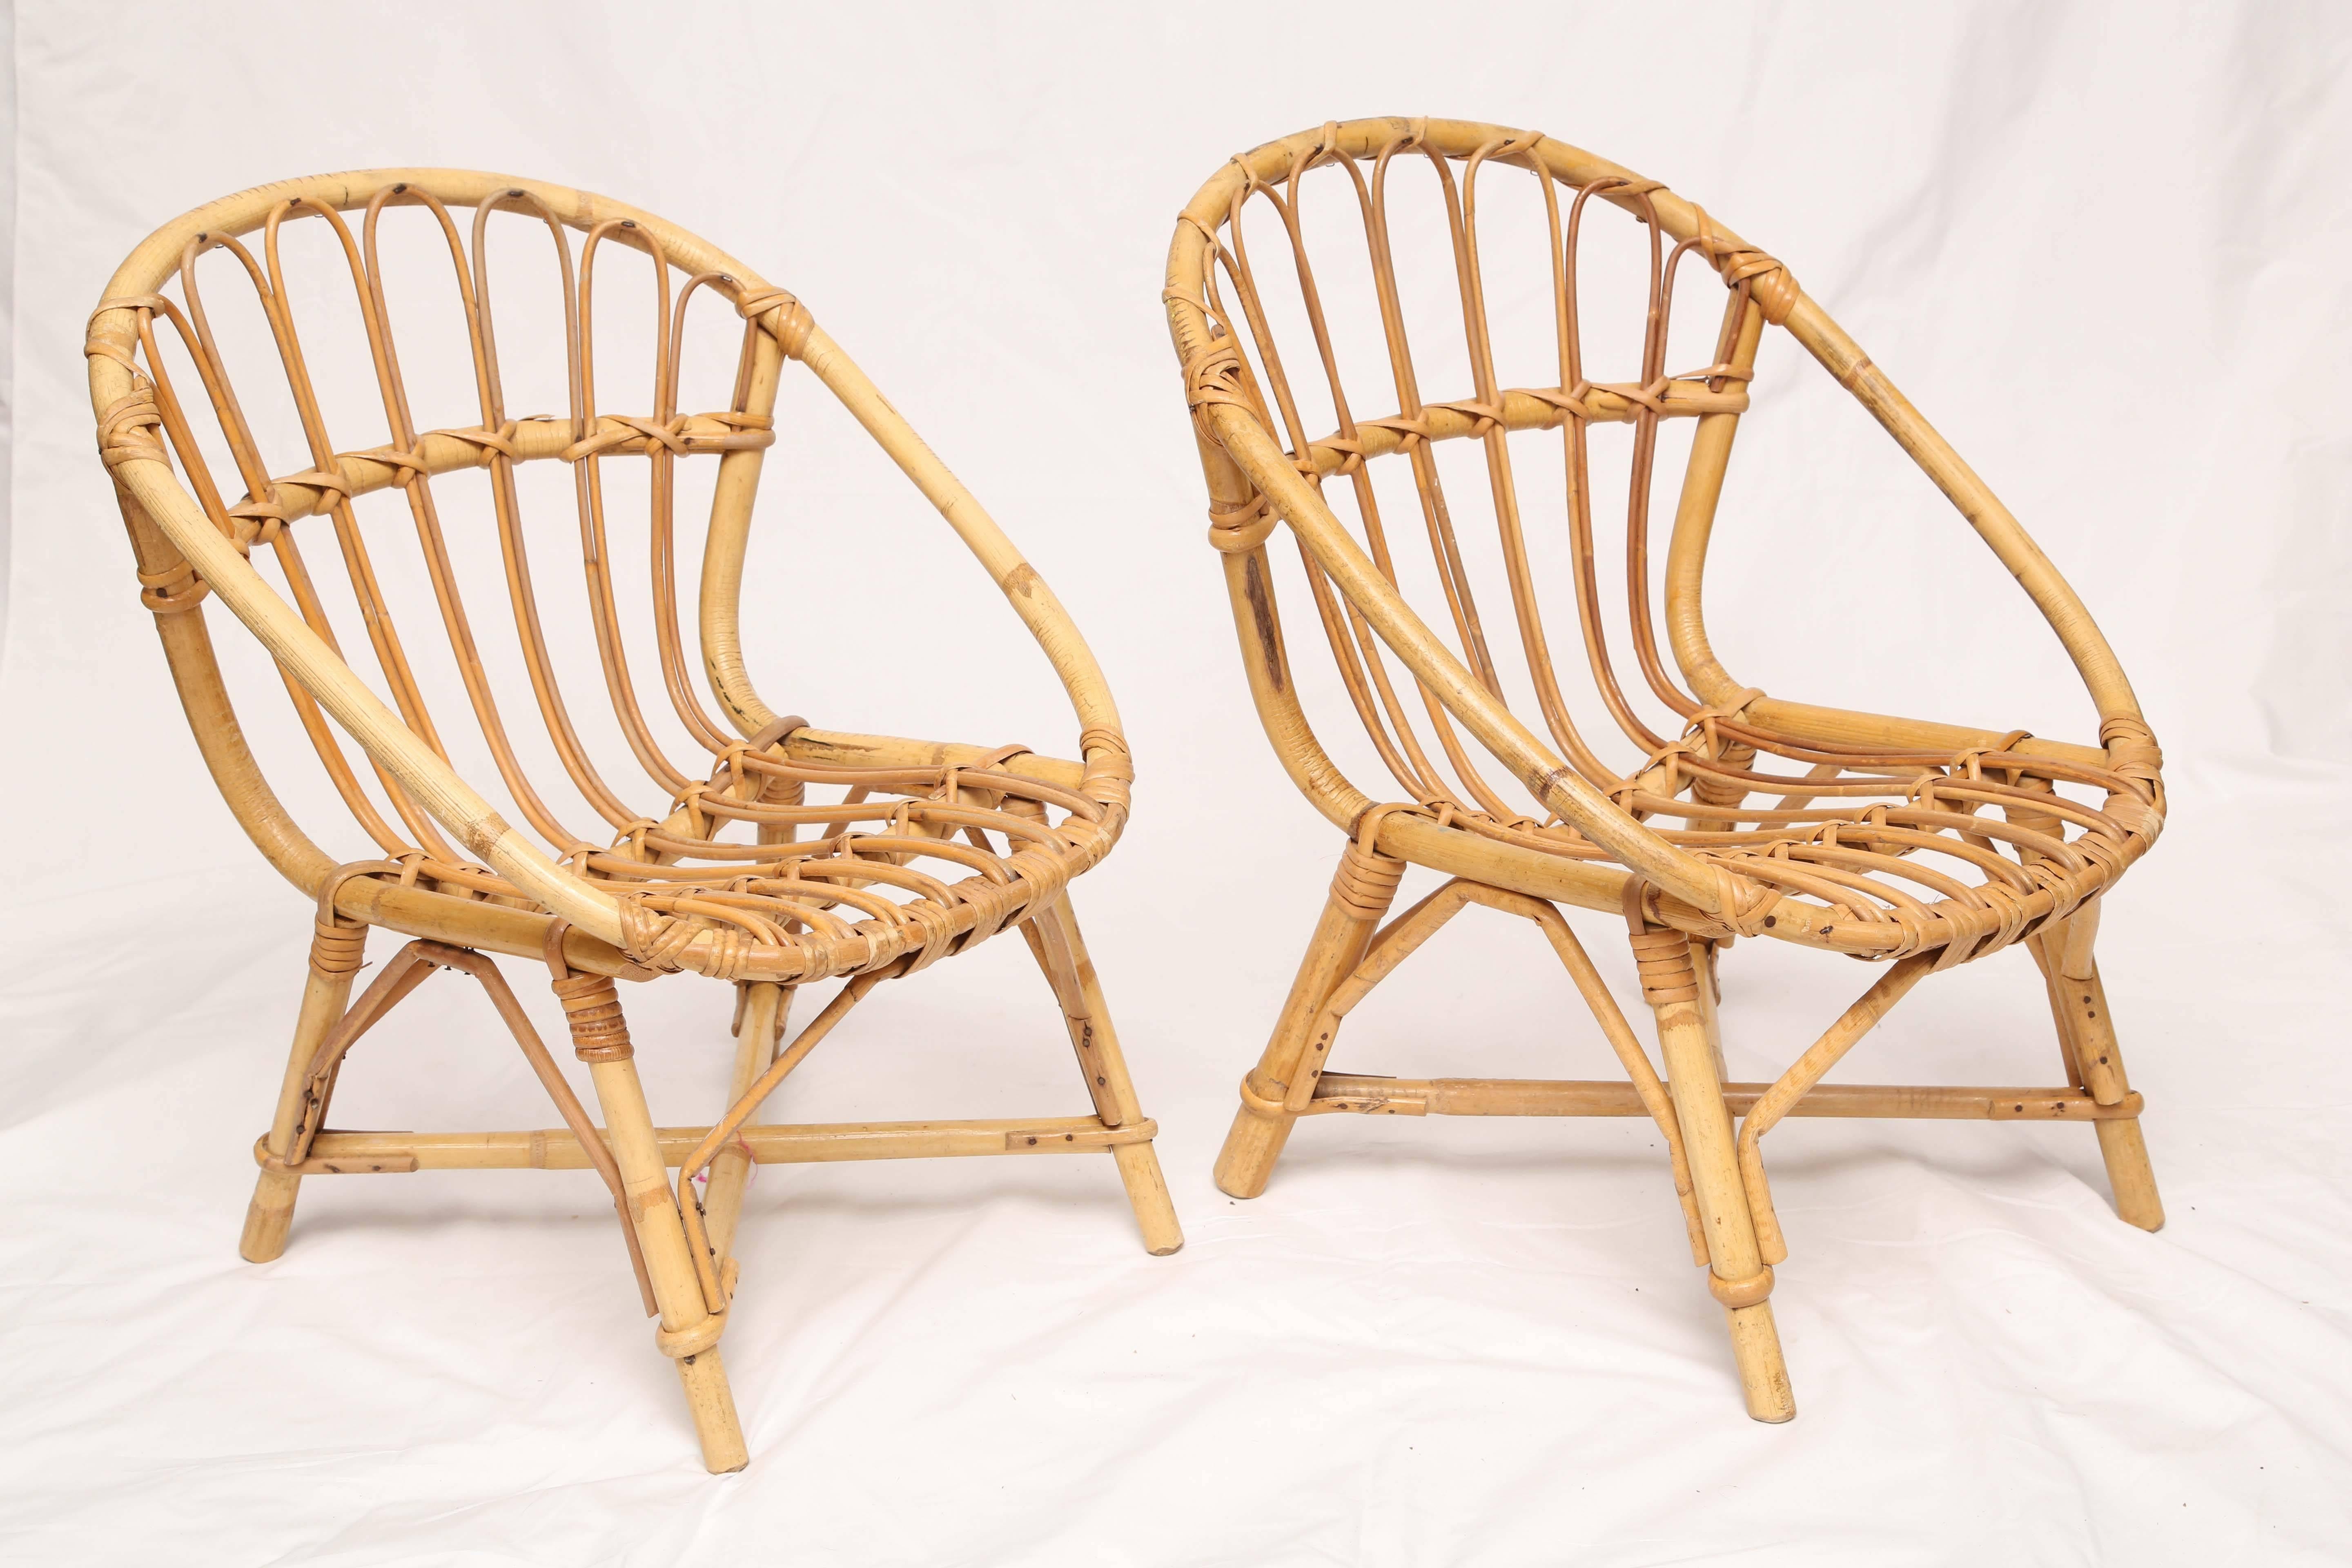 Pair of sweat vintage bamboo child chairs with plenty of details.